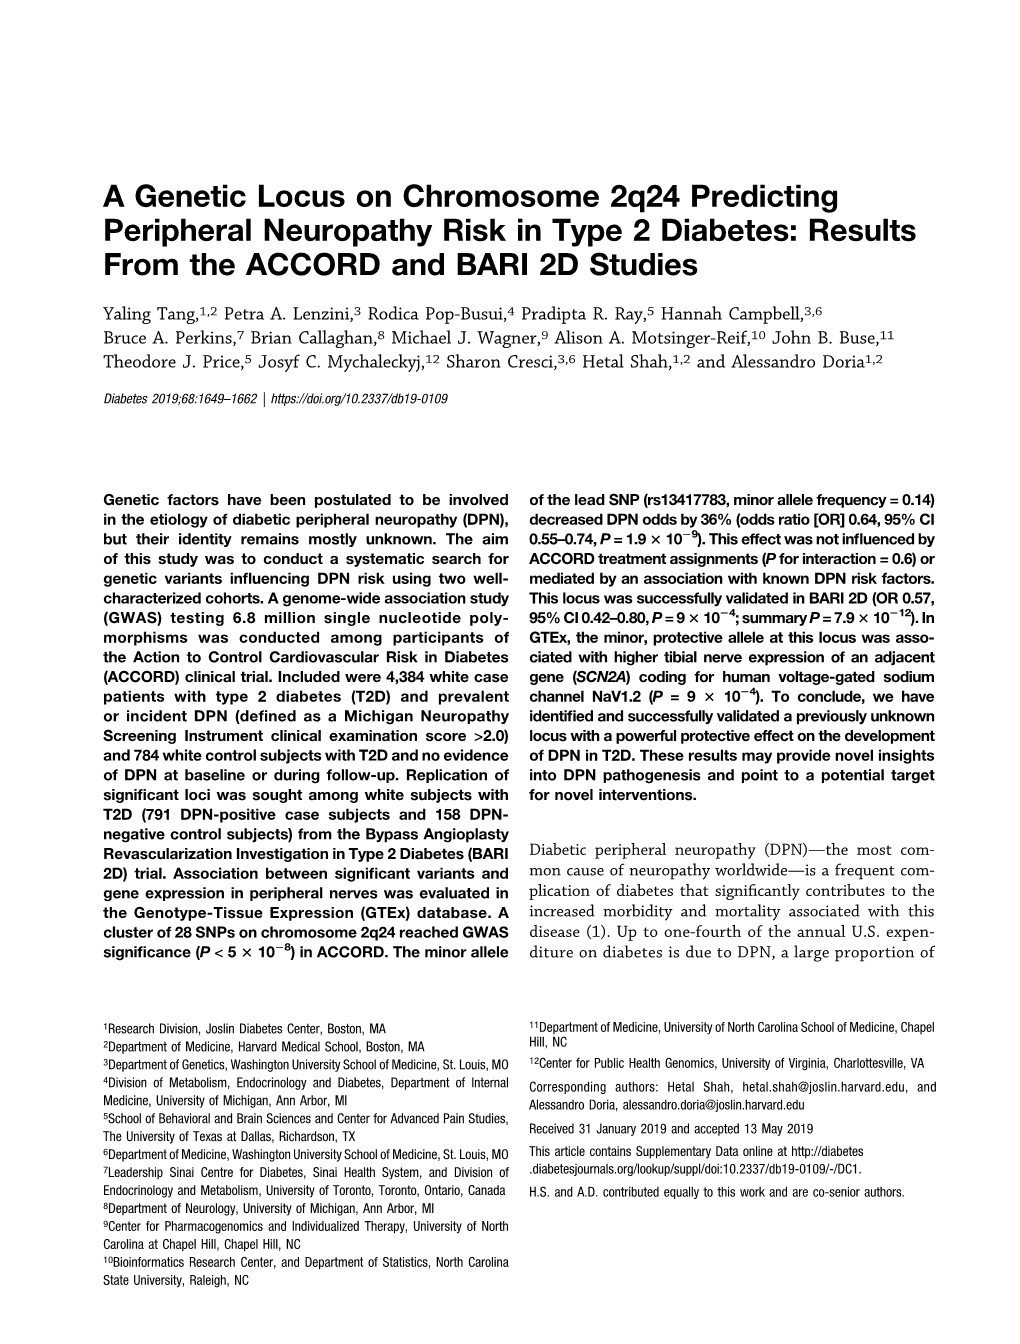 A Genetic Locus on Chromosome 2Q24 Predicting Peripheral Neuropathy Risk in Type 2 Diabetes: Results from the ACCORD and BARI 2D Studies